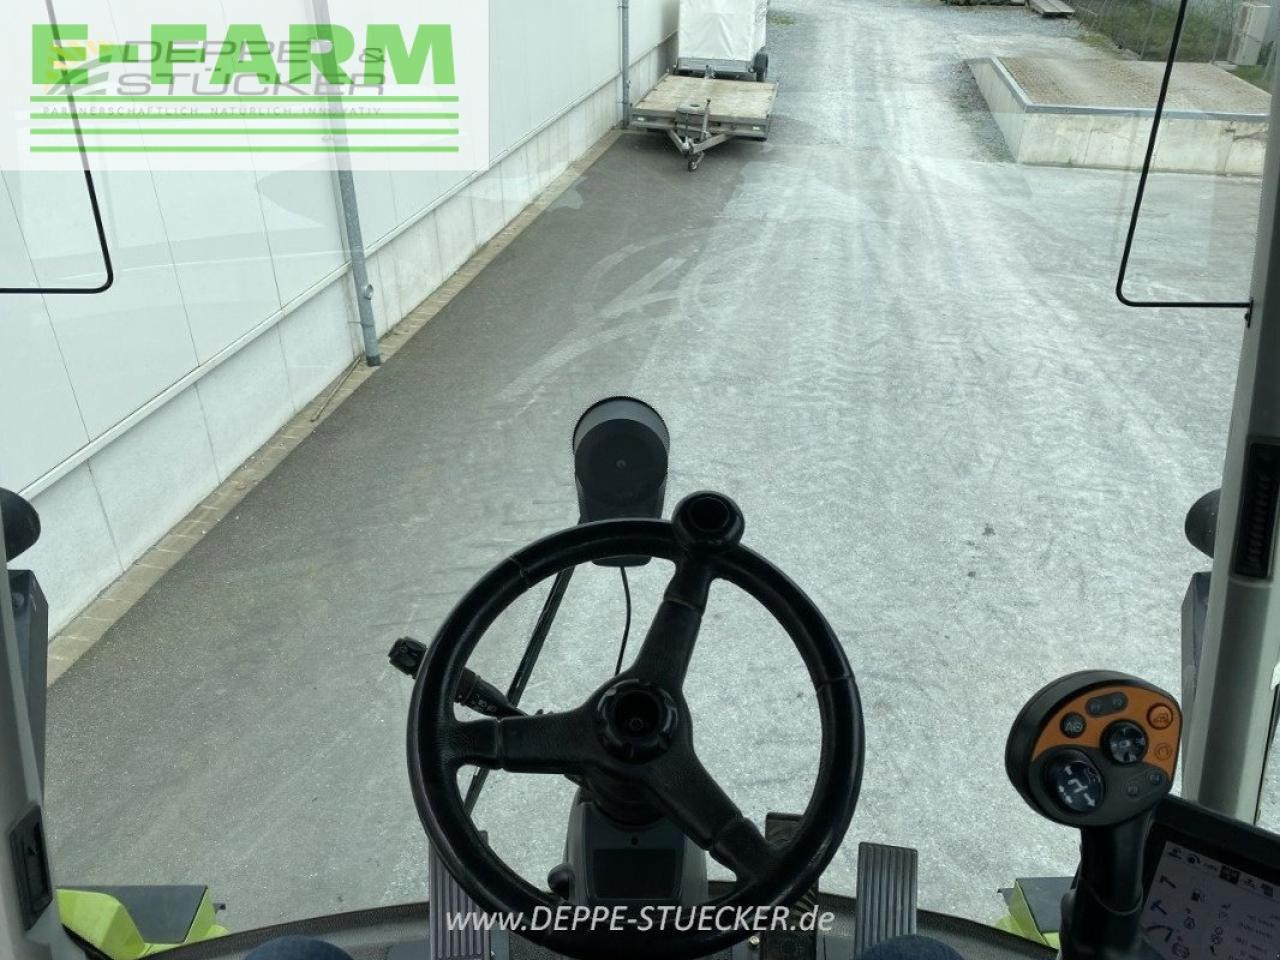 Tracteur agricole CLAAS xerion 3800 trac vc TRAC VC